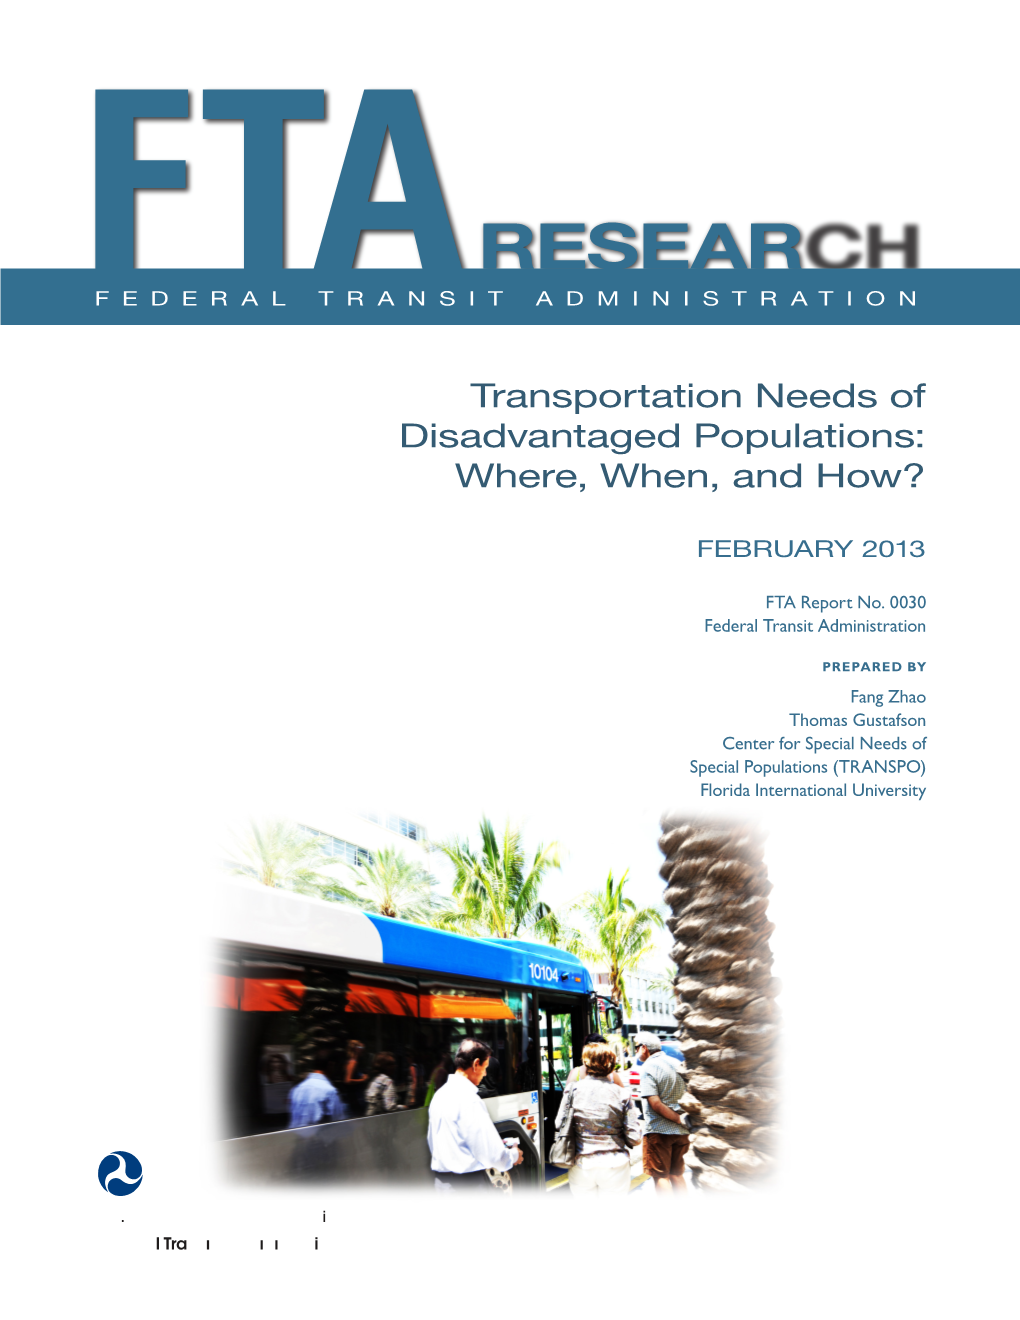 Transportation Needs of Disadvantaged Populations: Where, When, and How?